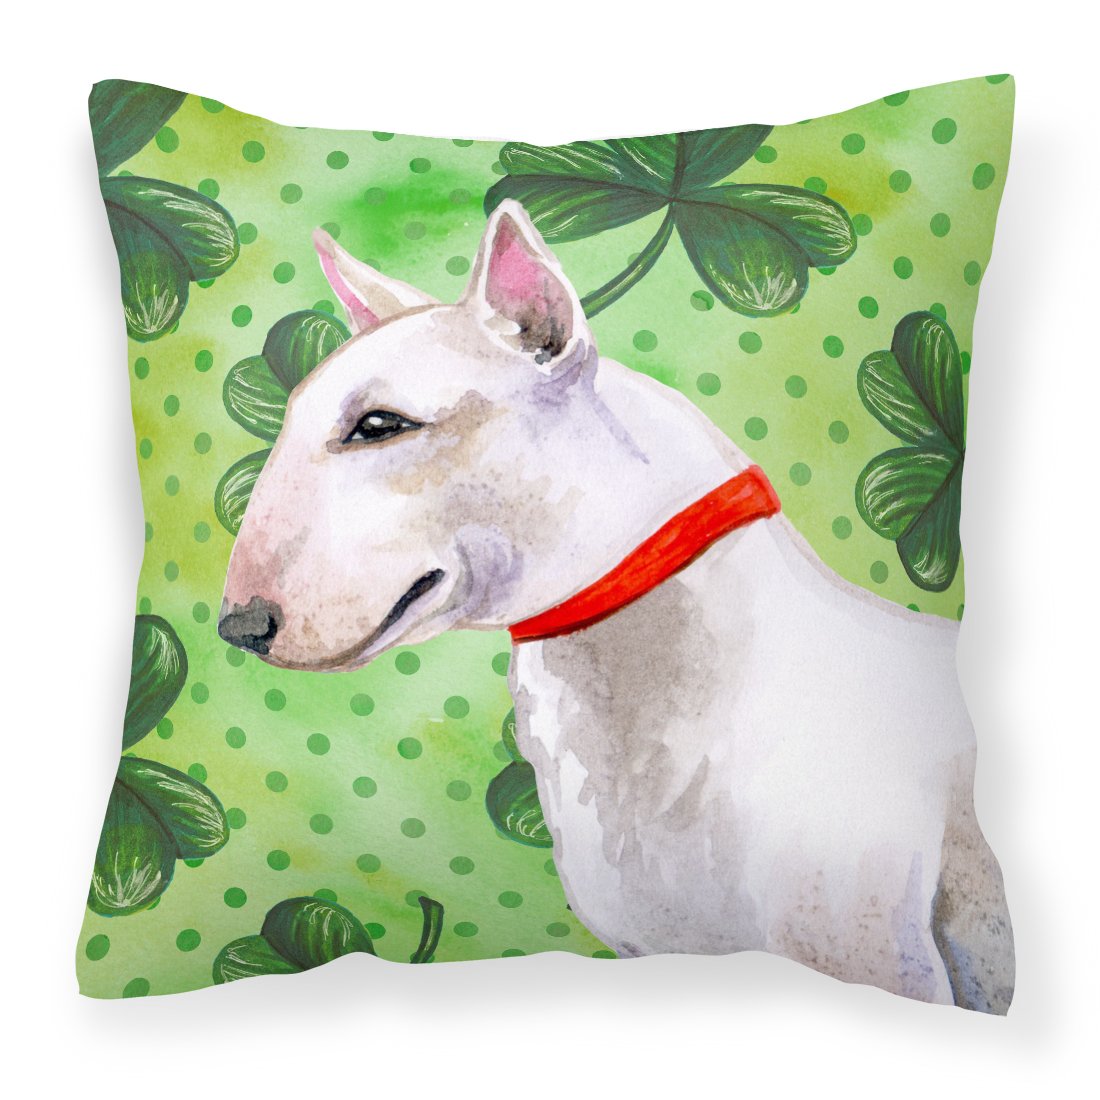 Bull Terrier St Patrick's Fabric Decorative Pillow BB9867PW1818 by Caroline's Treasures